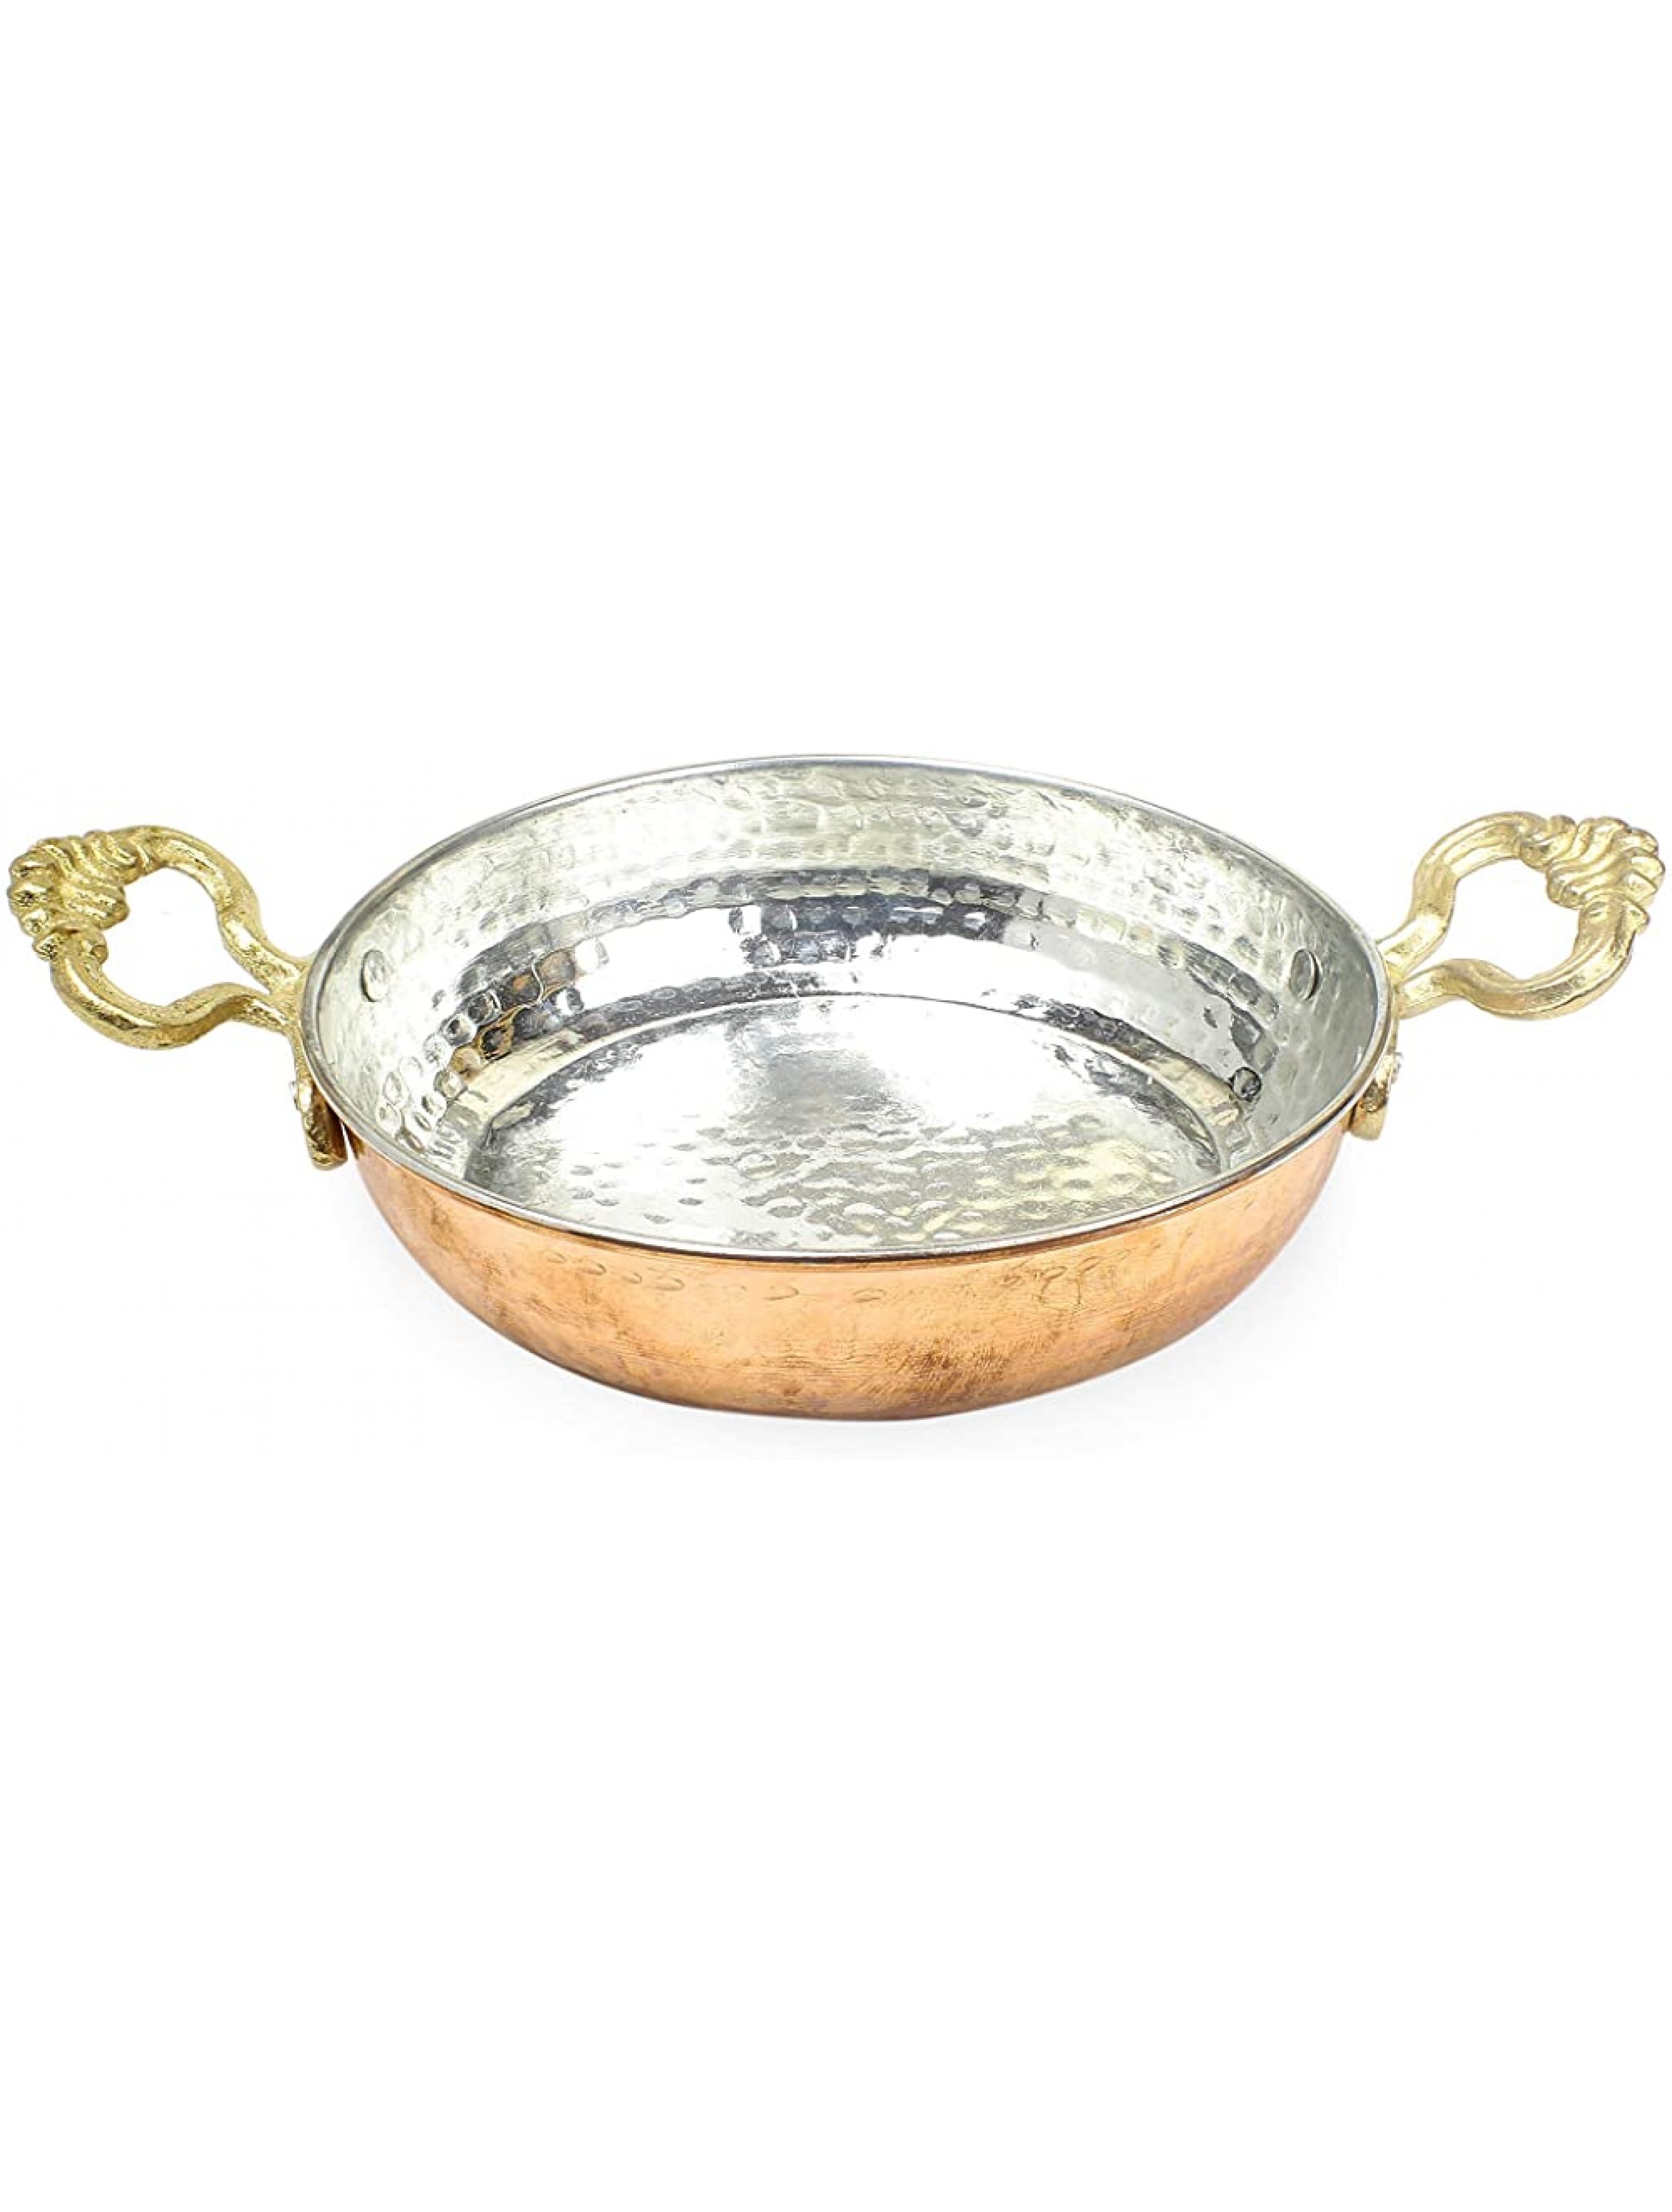 Turkish Copper Pan: Copper Egg Pan | Turkish Frying Omelet Pan | Antique Copper Pan Used for Frying or Decoration 6.7 inches 17 cm - BIVQ5L83Y